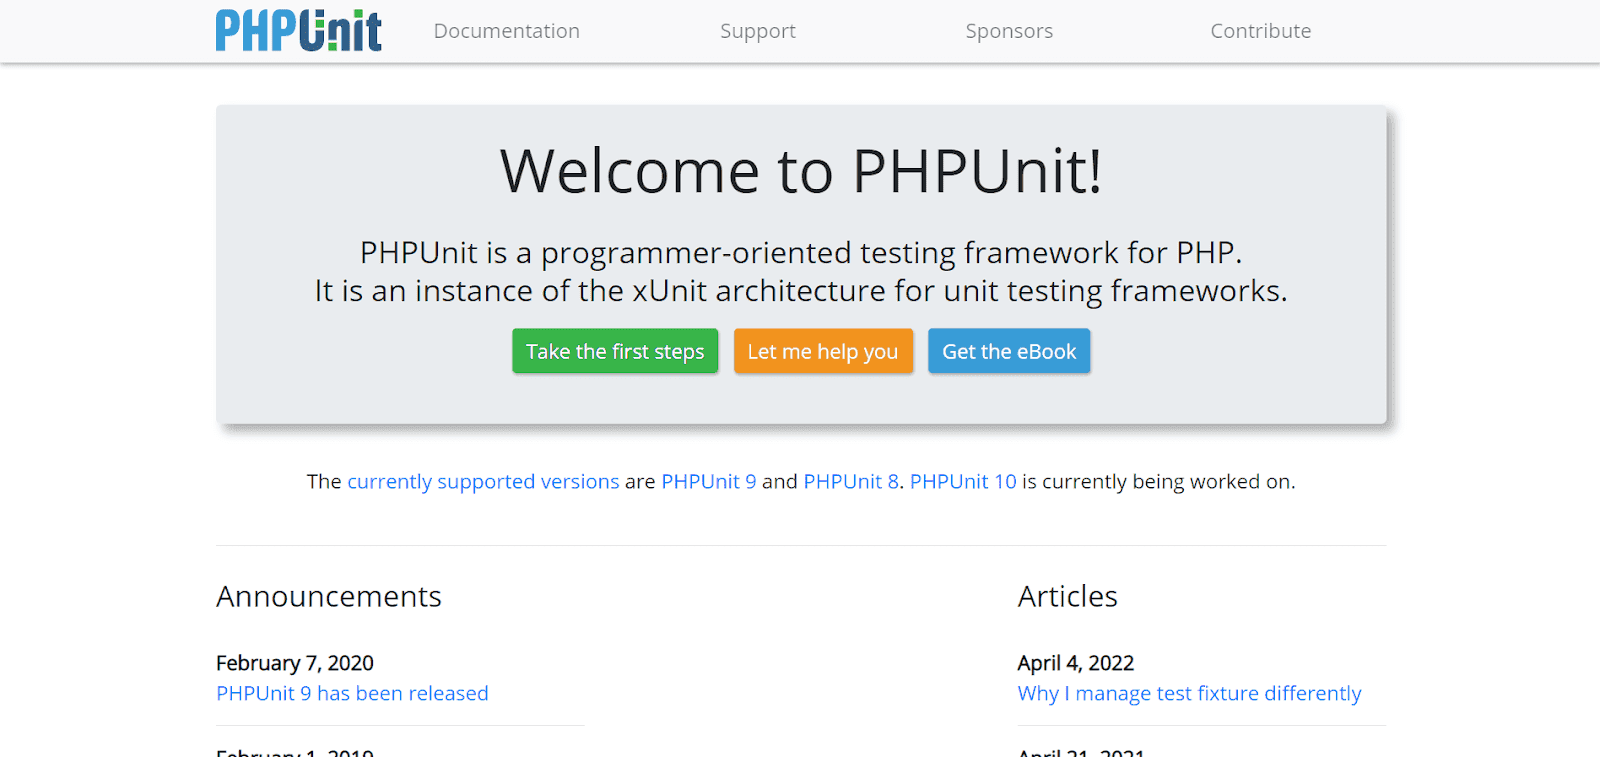 PHPUnit is the PHP community's preferred unit testing framework